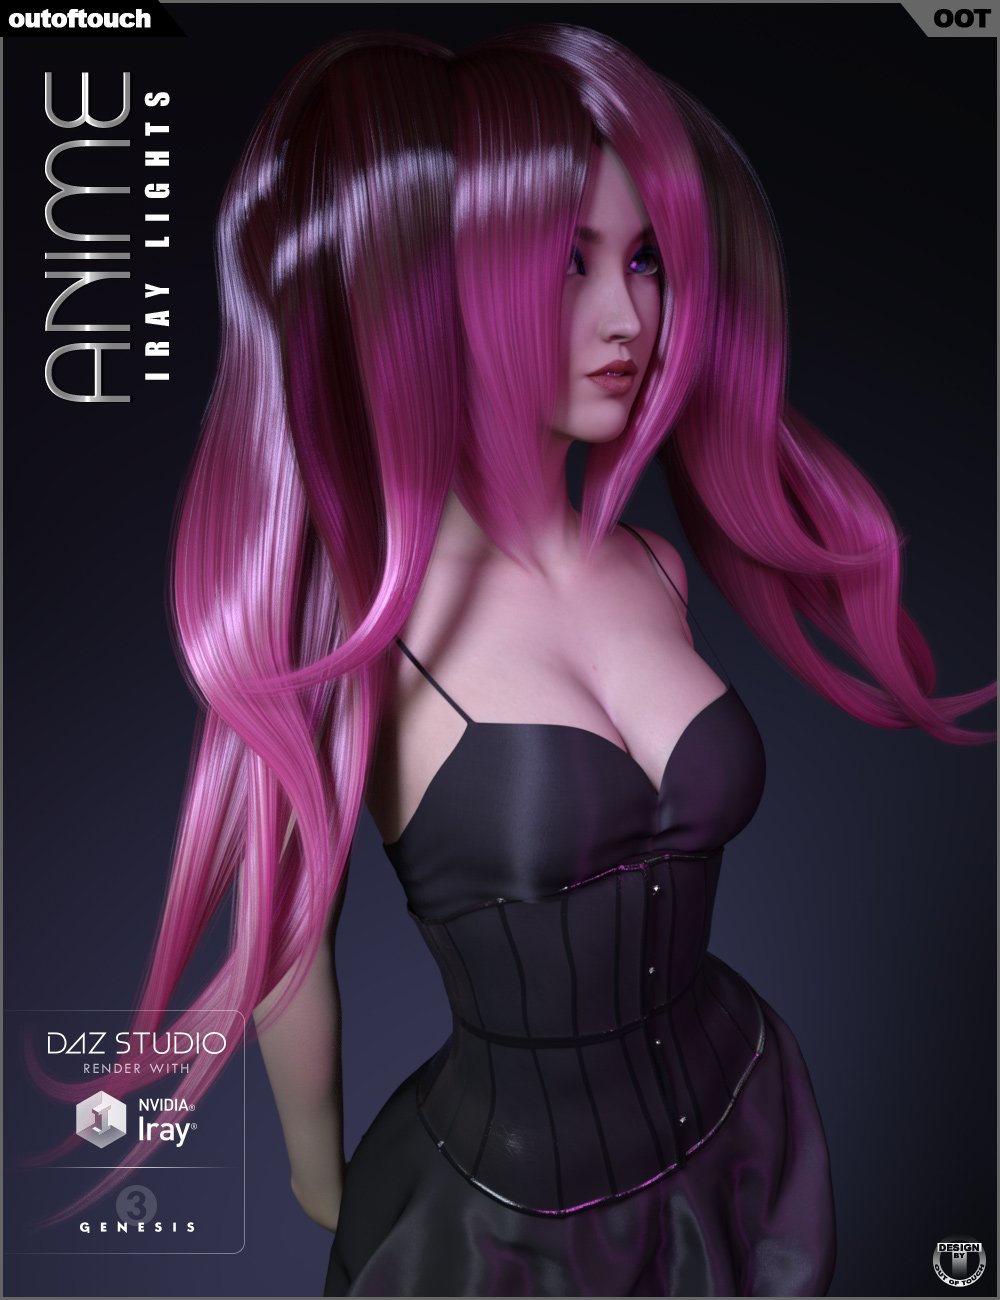 OOT Anime Iray Lights by: outoftouch, 3D Models by Daz 3D